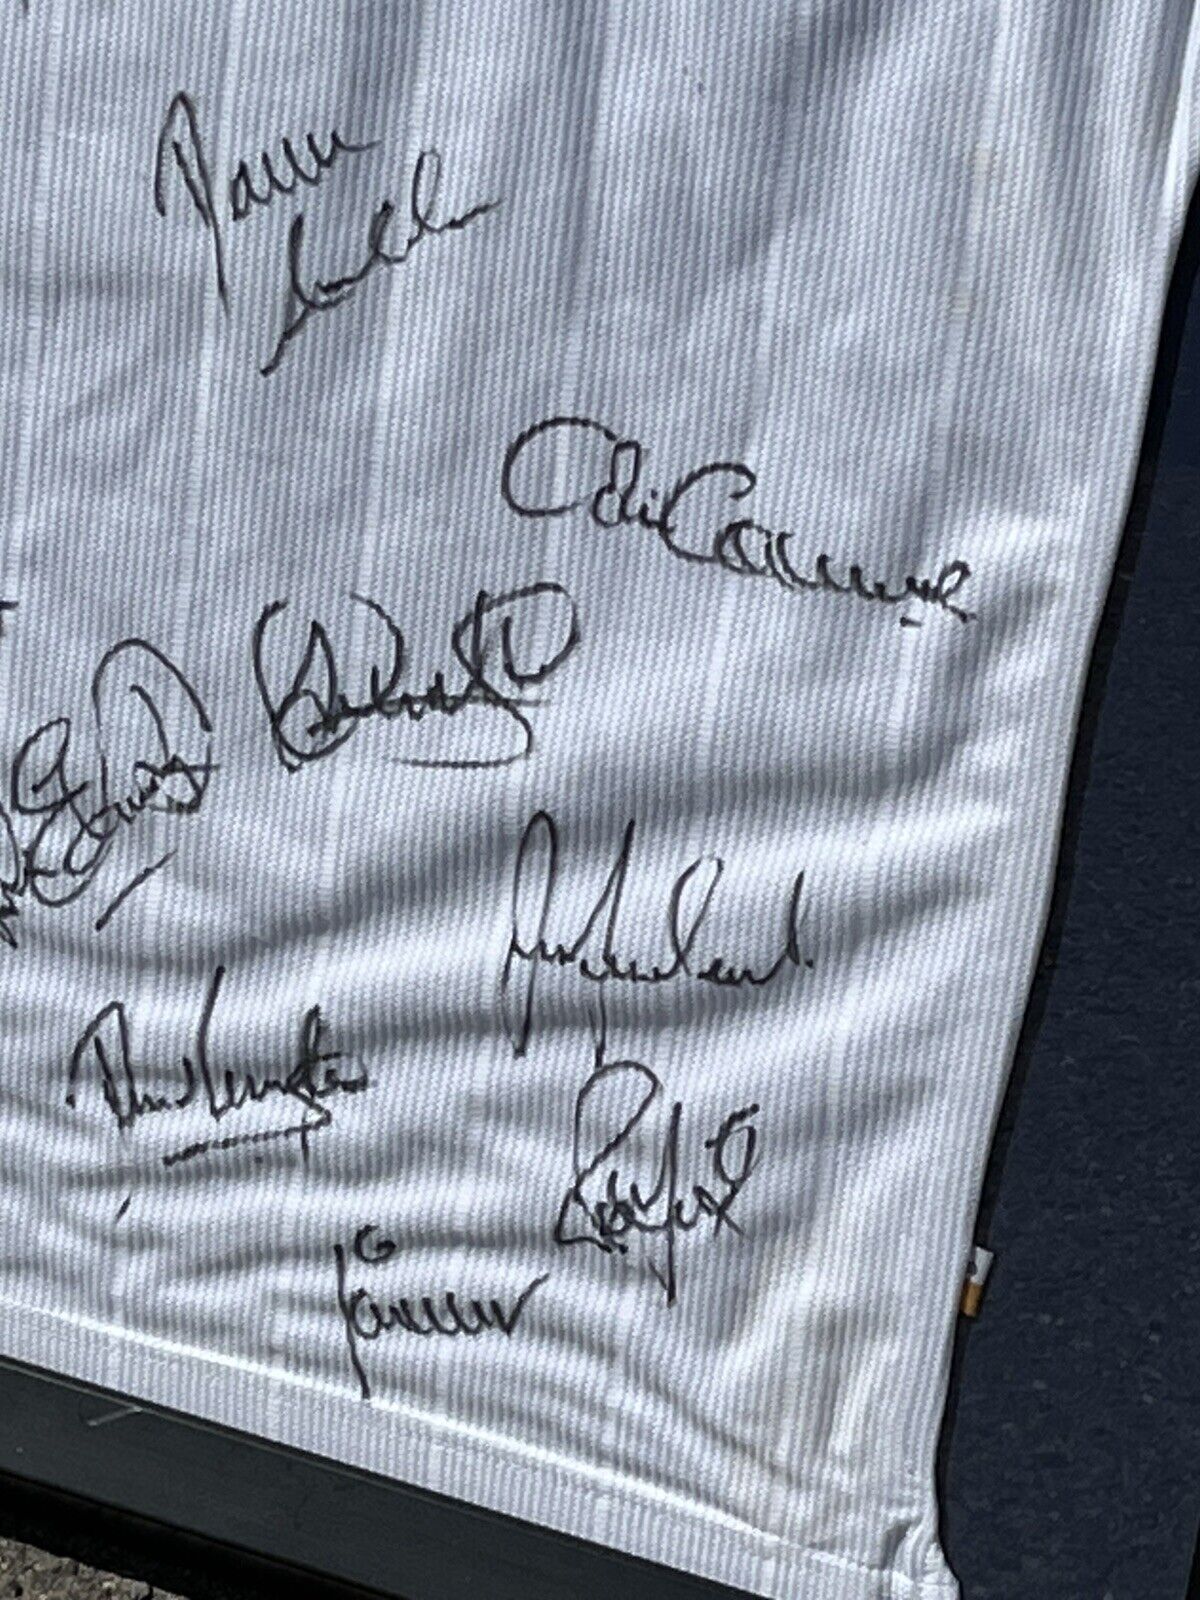 Signed Spurs Shirt, Framed With Lots Of Signatures.